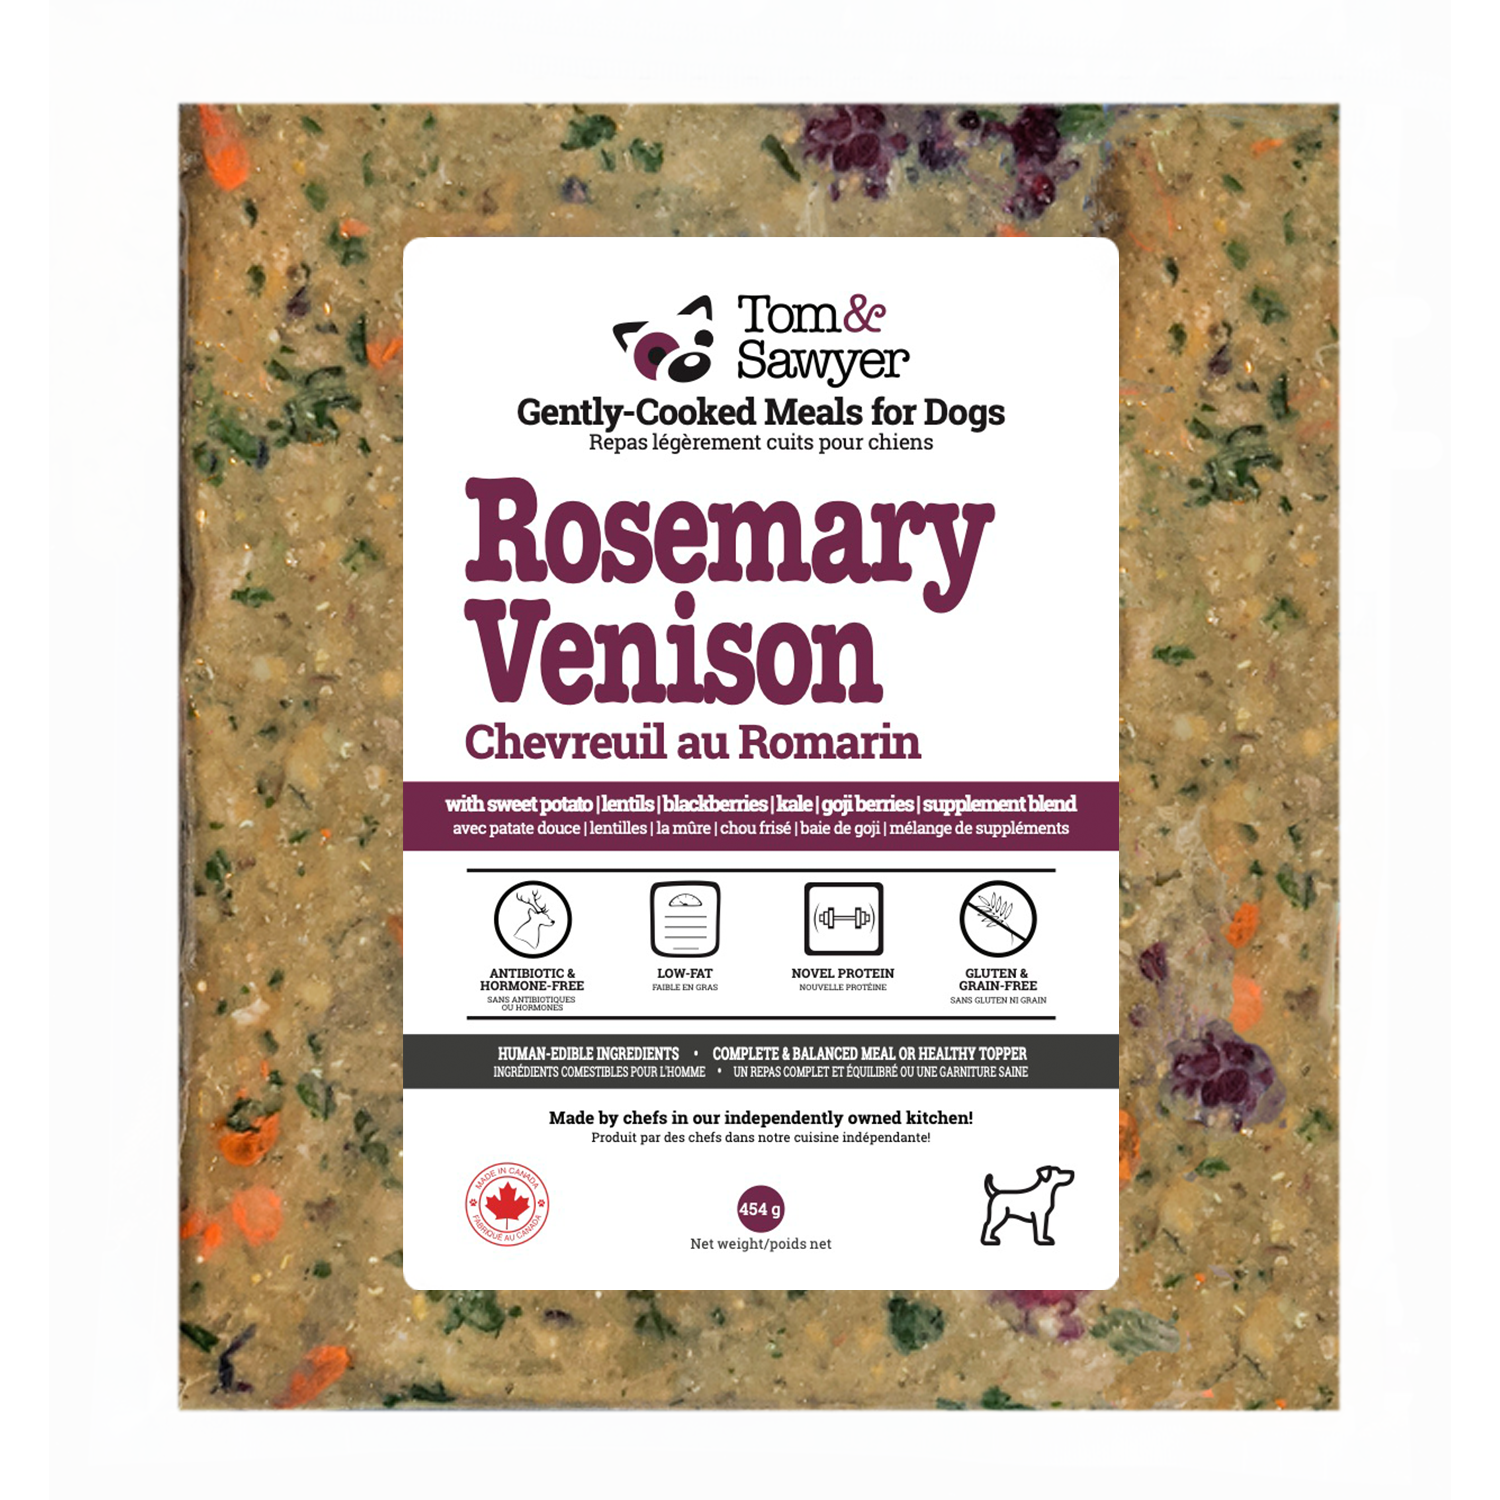 Tom & Sawyer - Gently Cooked - Rosemary Venison